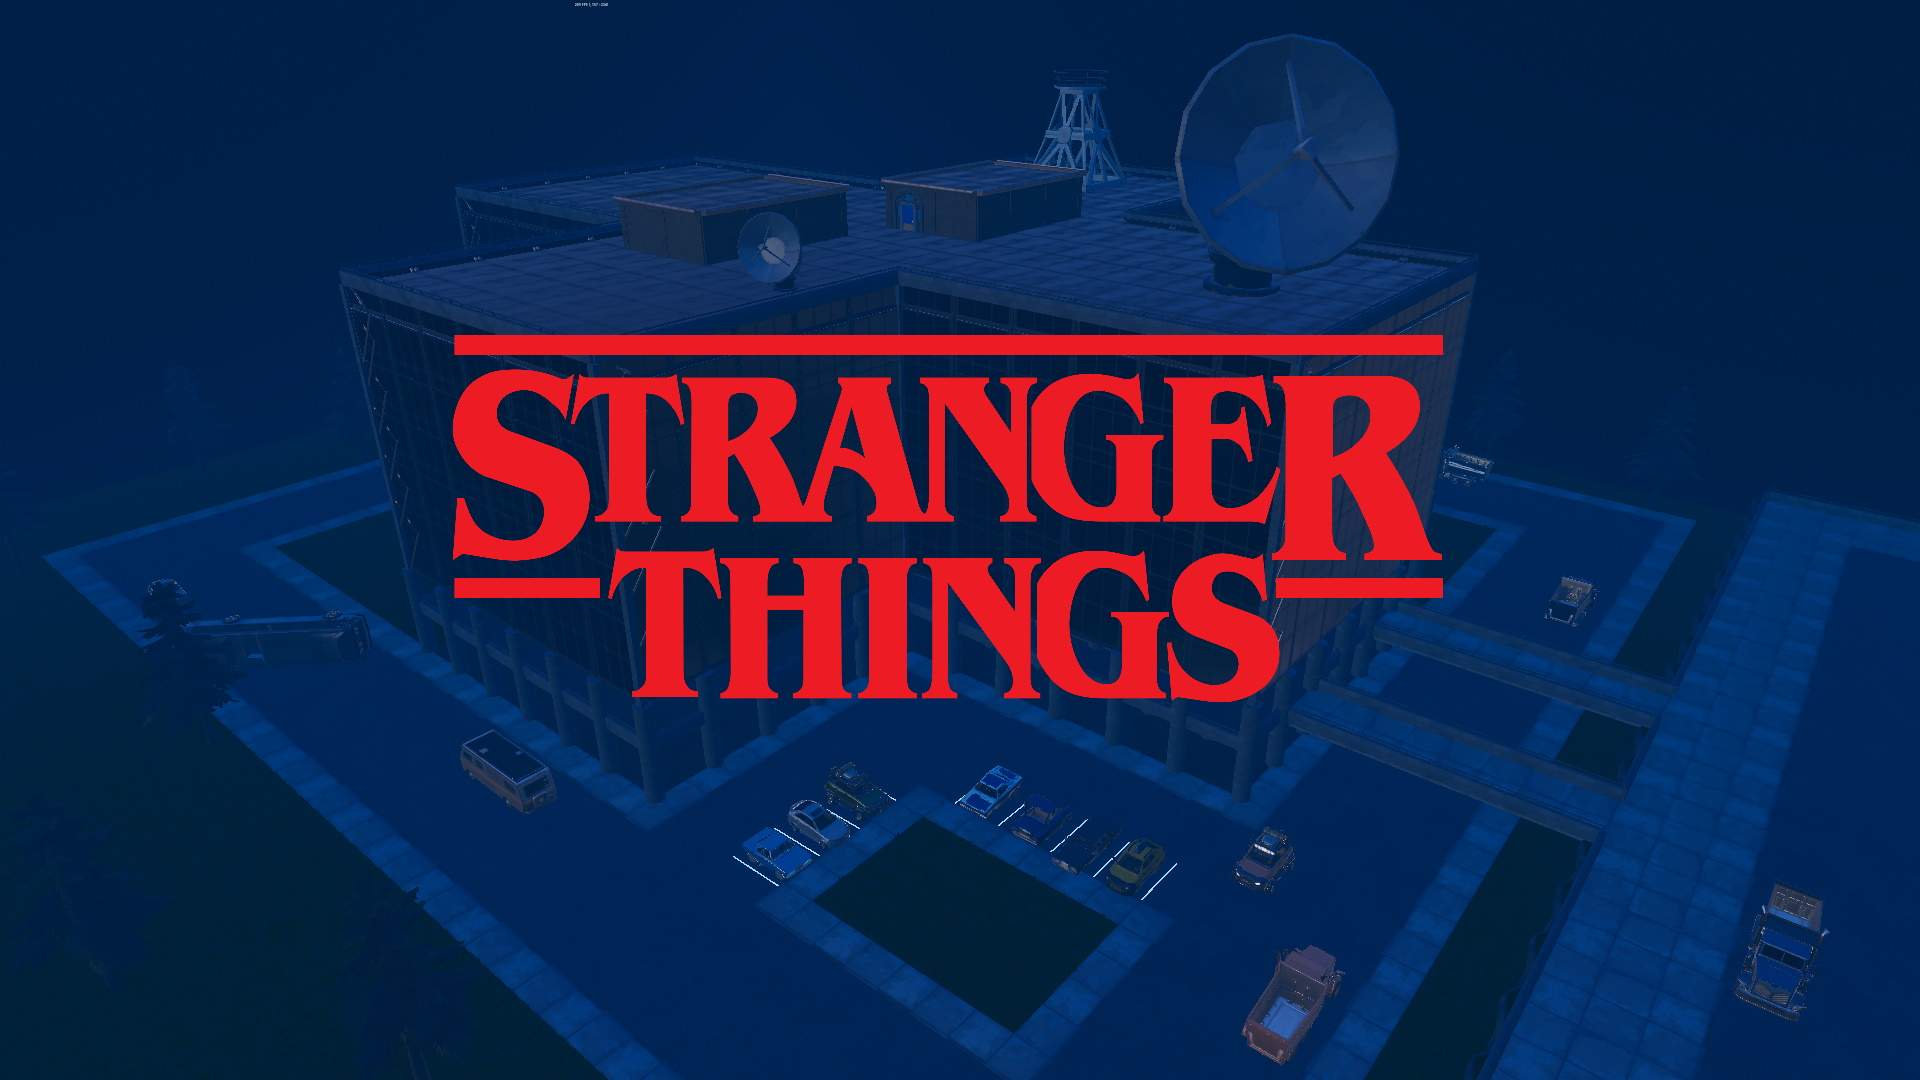 STRANGER THINGS FIND THE BUTTON 0996-1187-3976